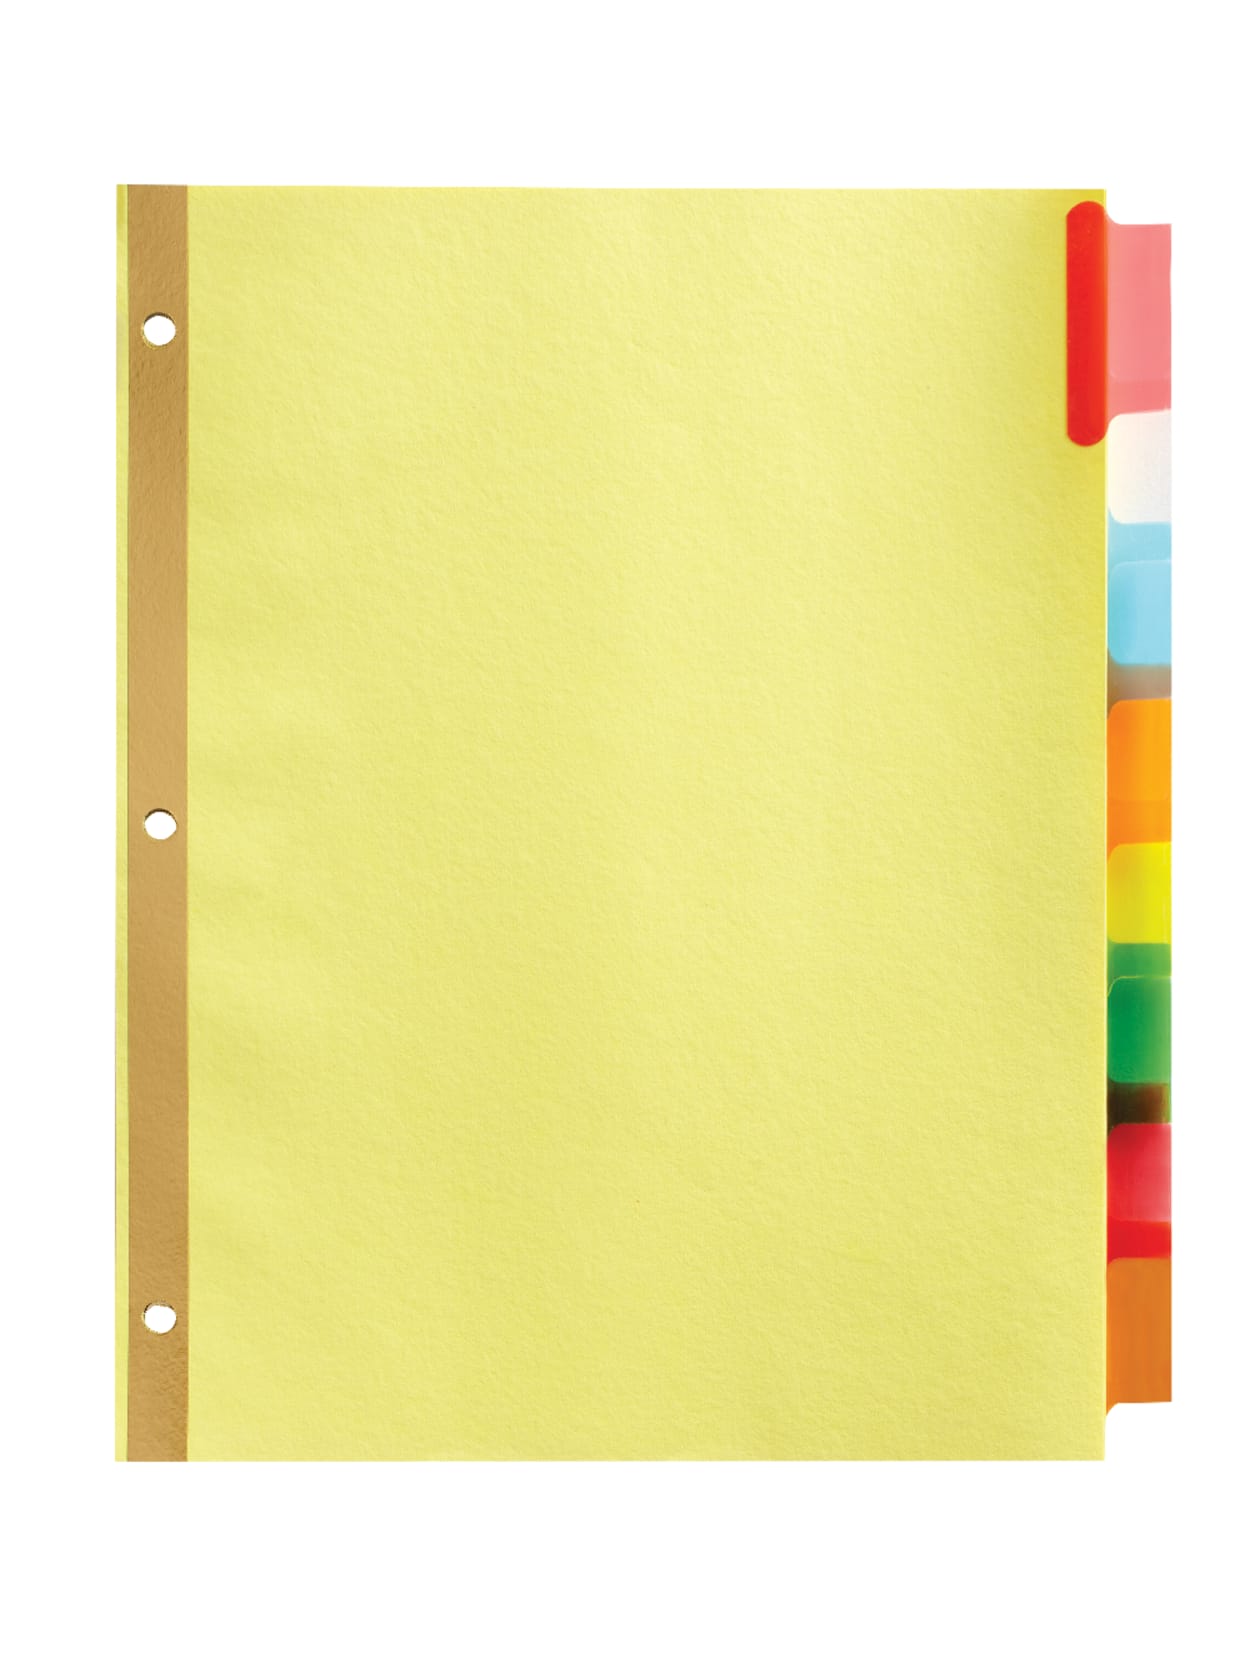 8-Tab 9 1//8in x 11 1//4in Assorted Colors Office Depot Brand Insertable Pocket Dividers with Tabs